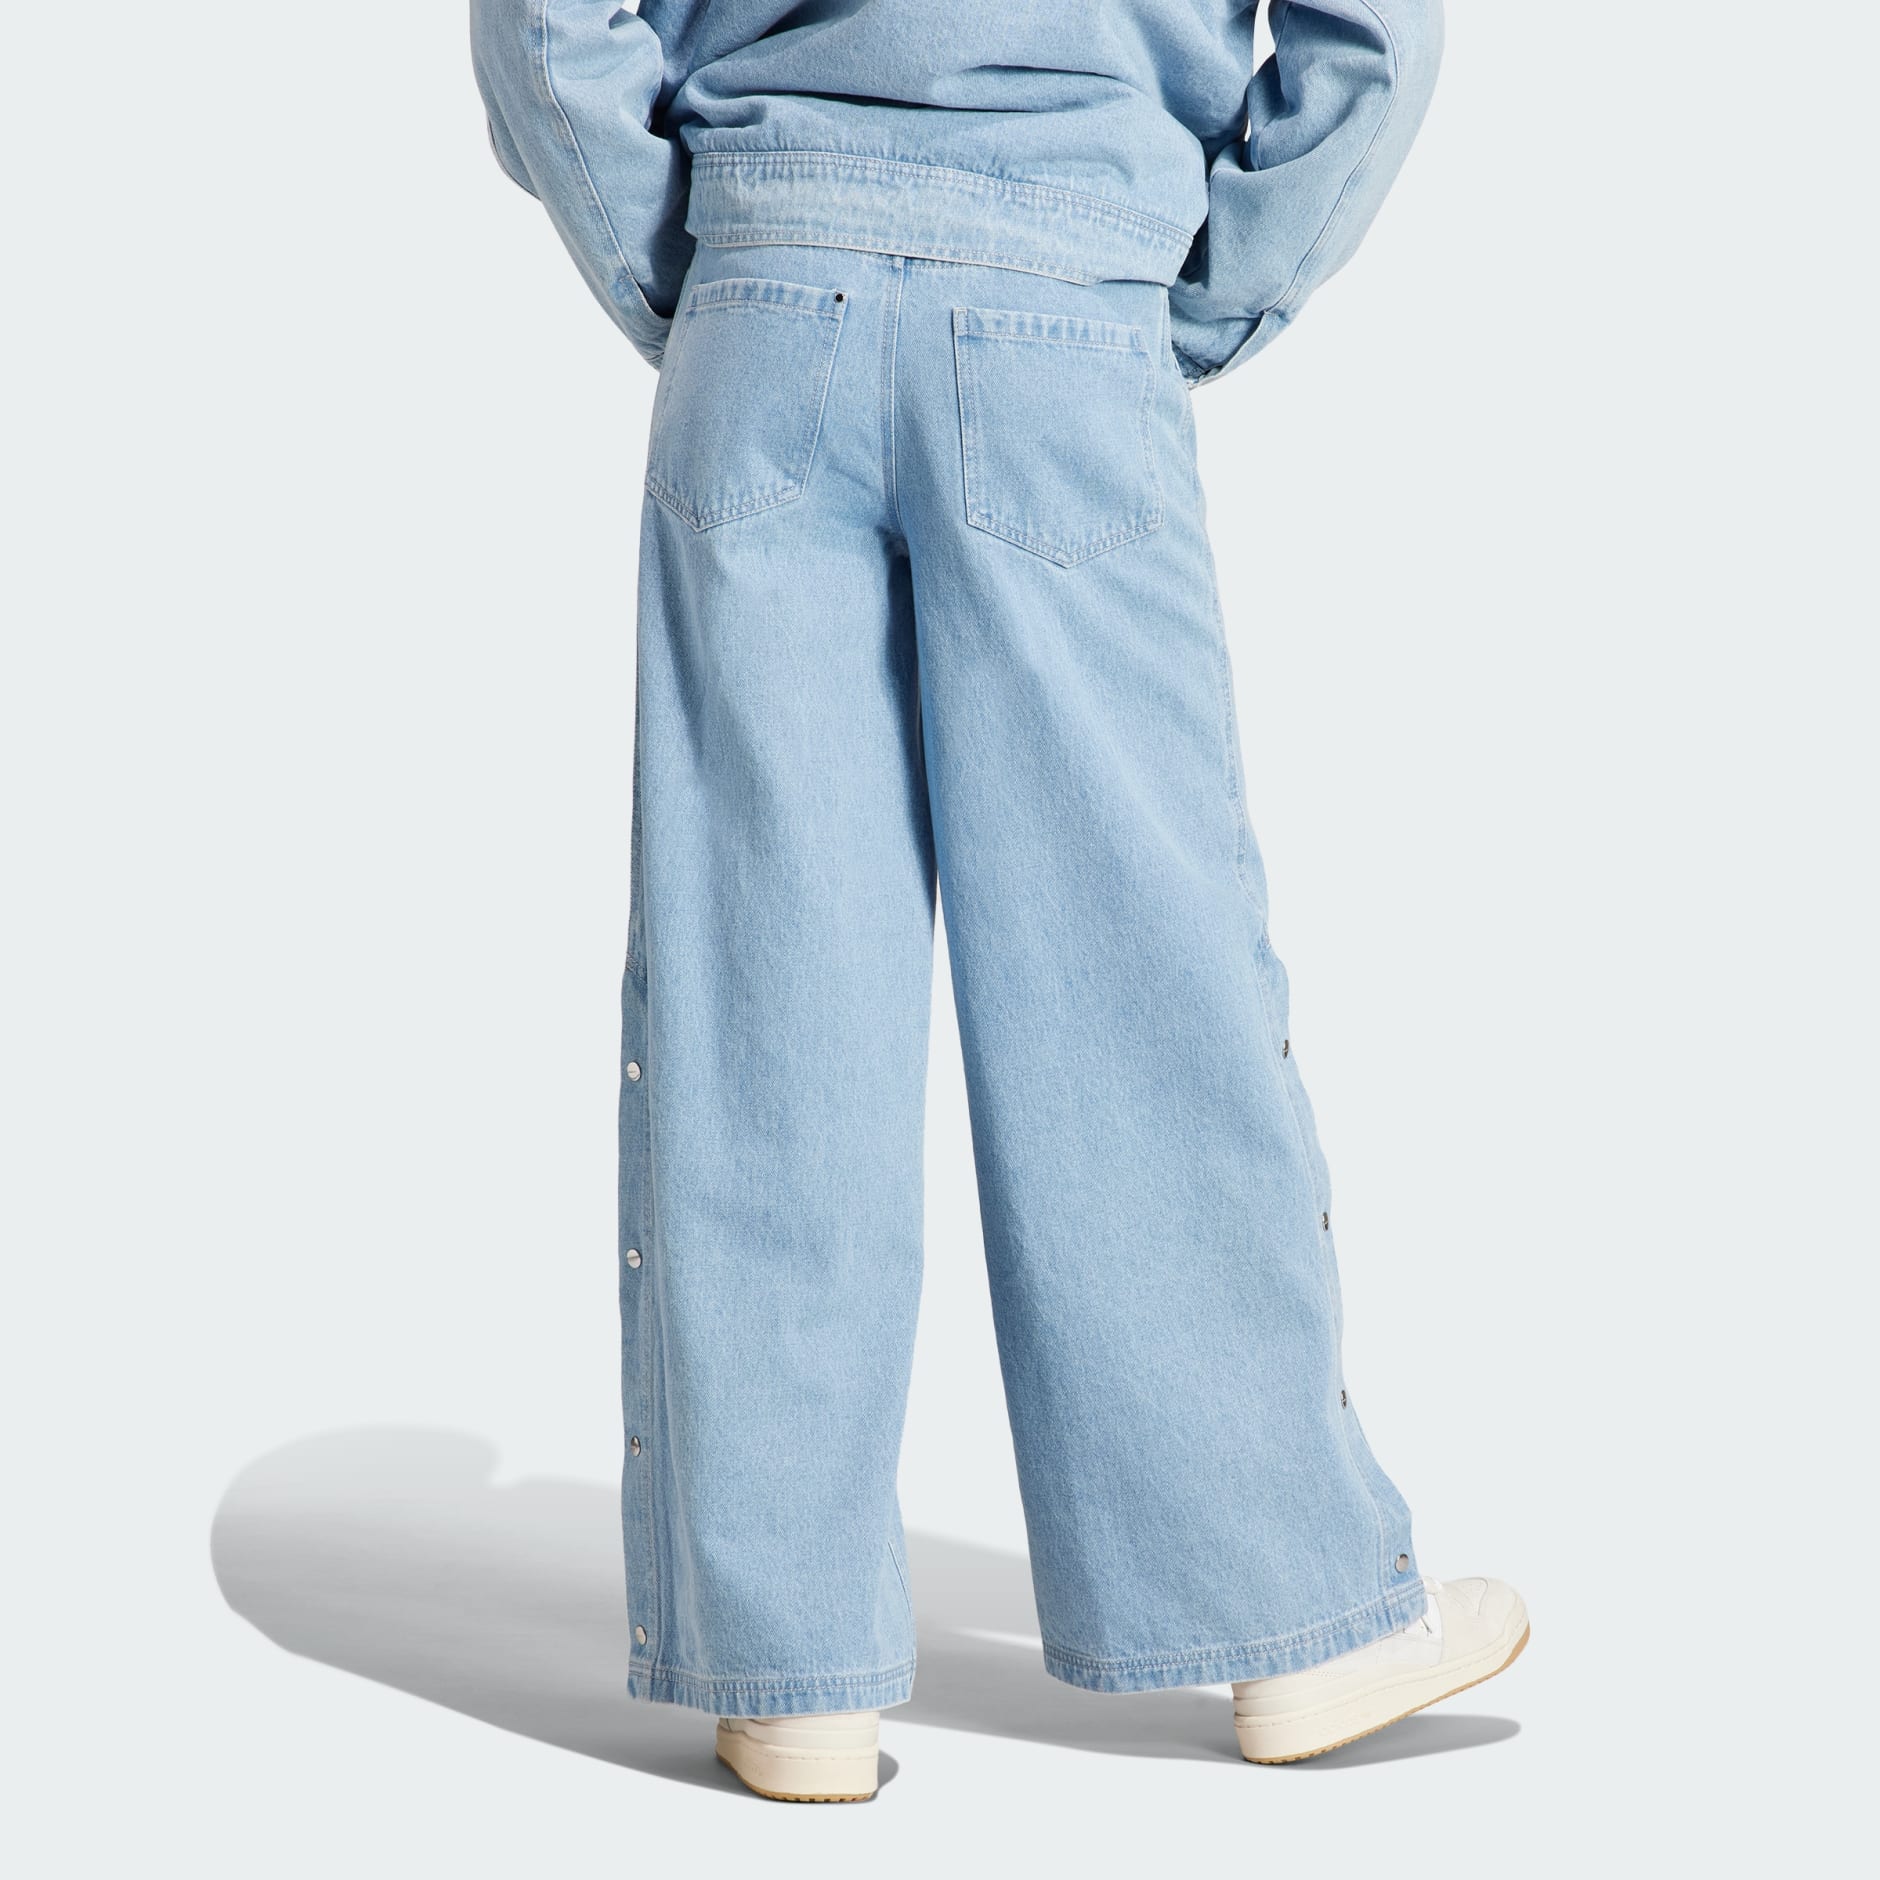 Clothing - Neutral Court Denim Pants - Blue | adidas South Africa